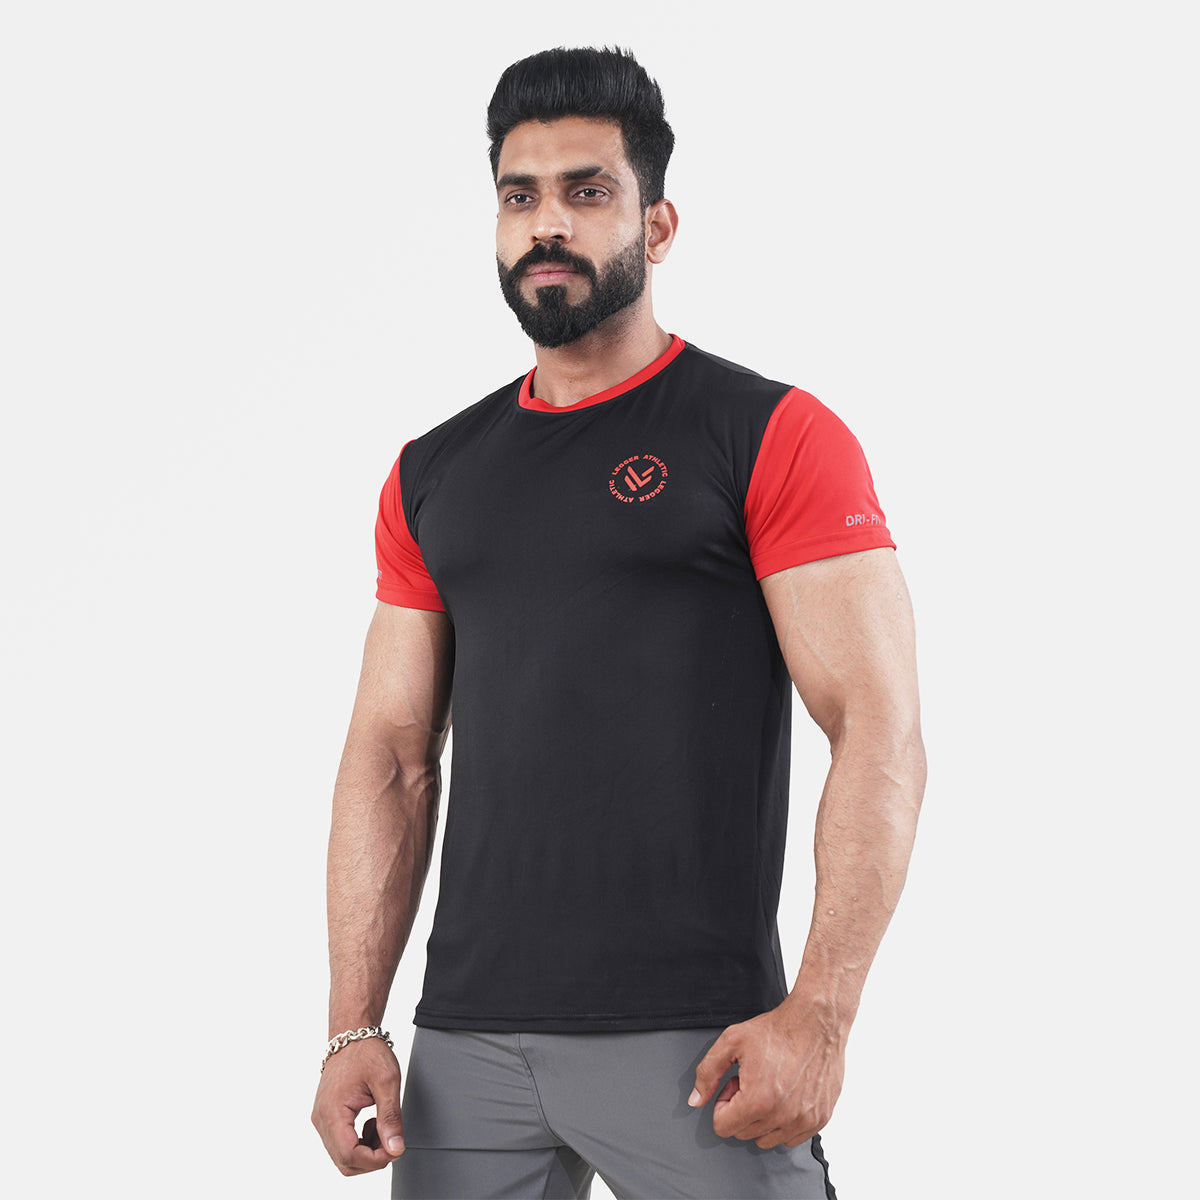 ULTRA Fitness Black Combo Compression TEE